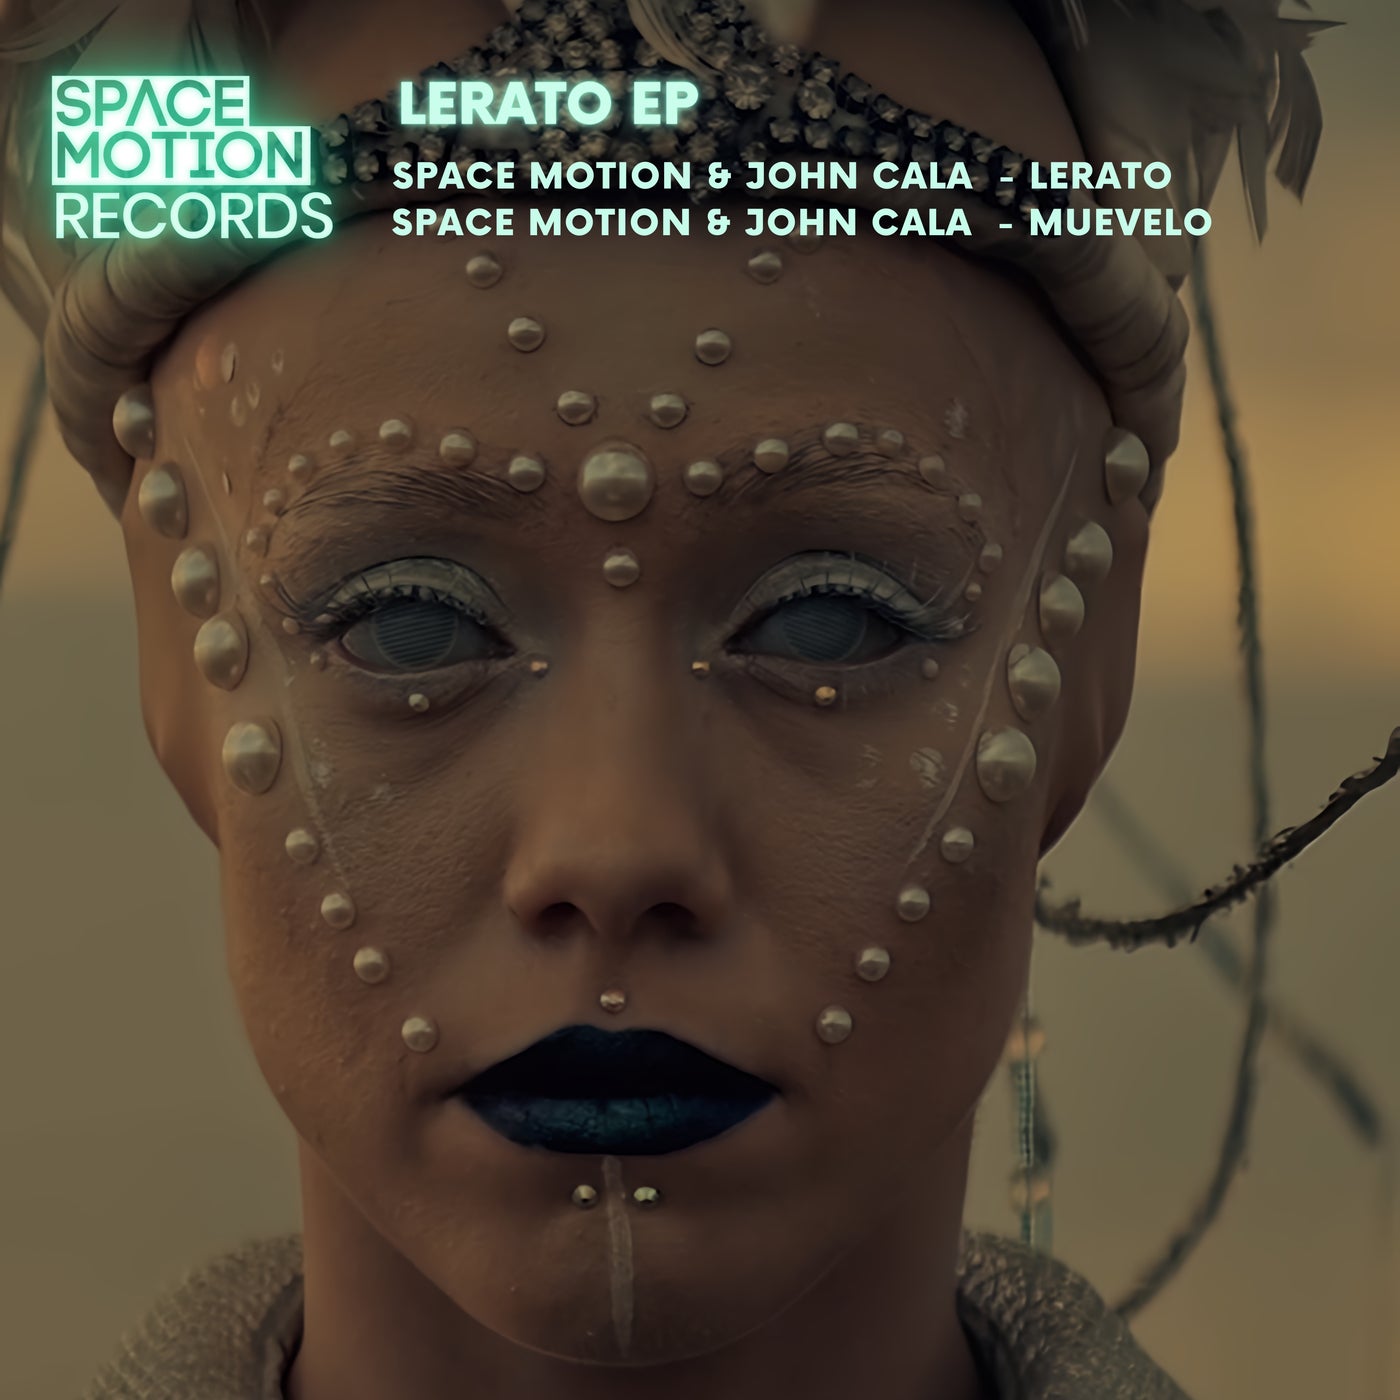 image cover: Space Motion, John Cala - Lerato EP on Space Motion Records